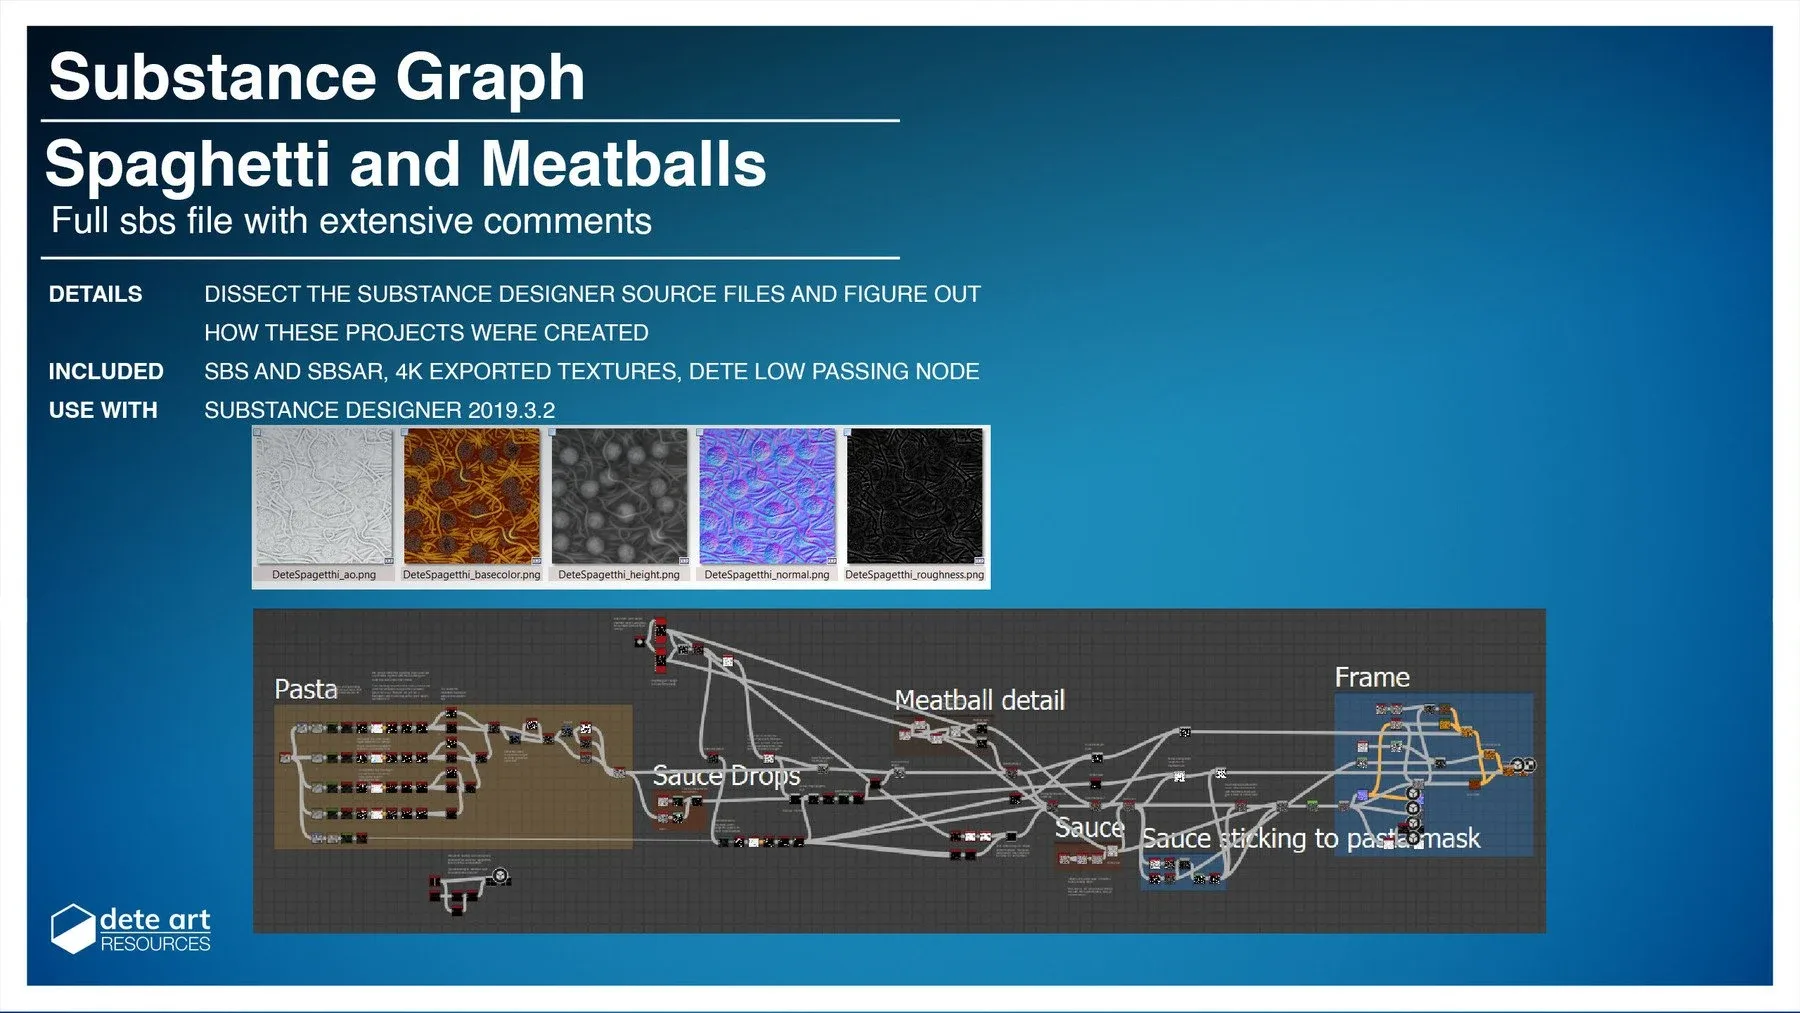 Substance Graph | Spaghetti and Meatballs